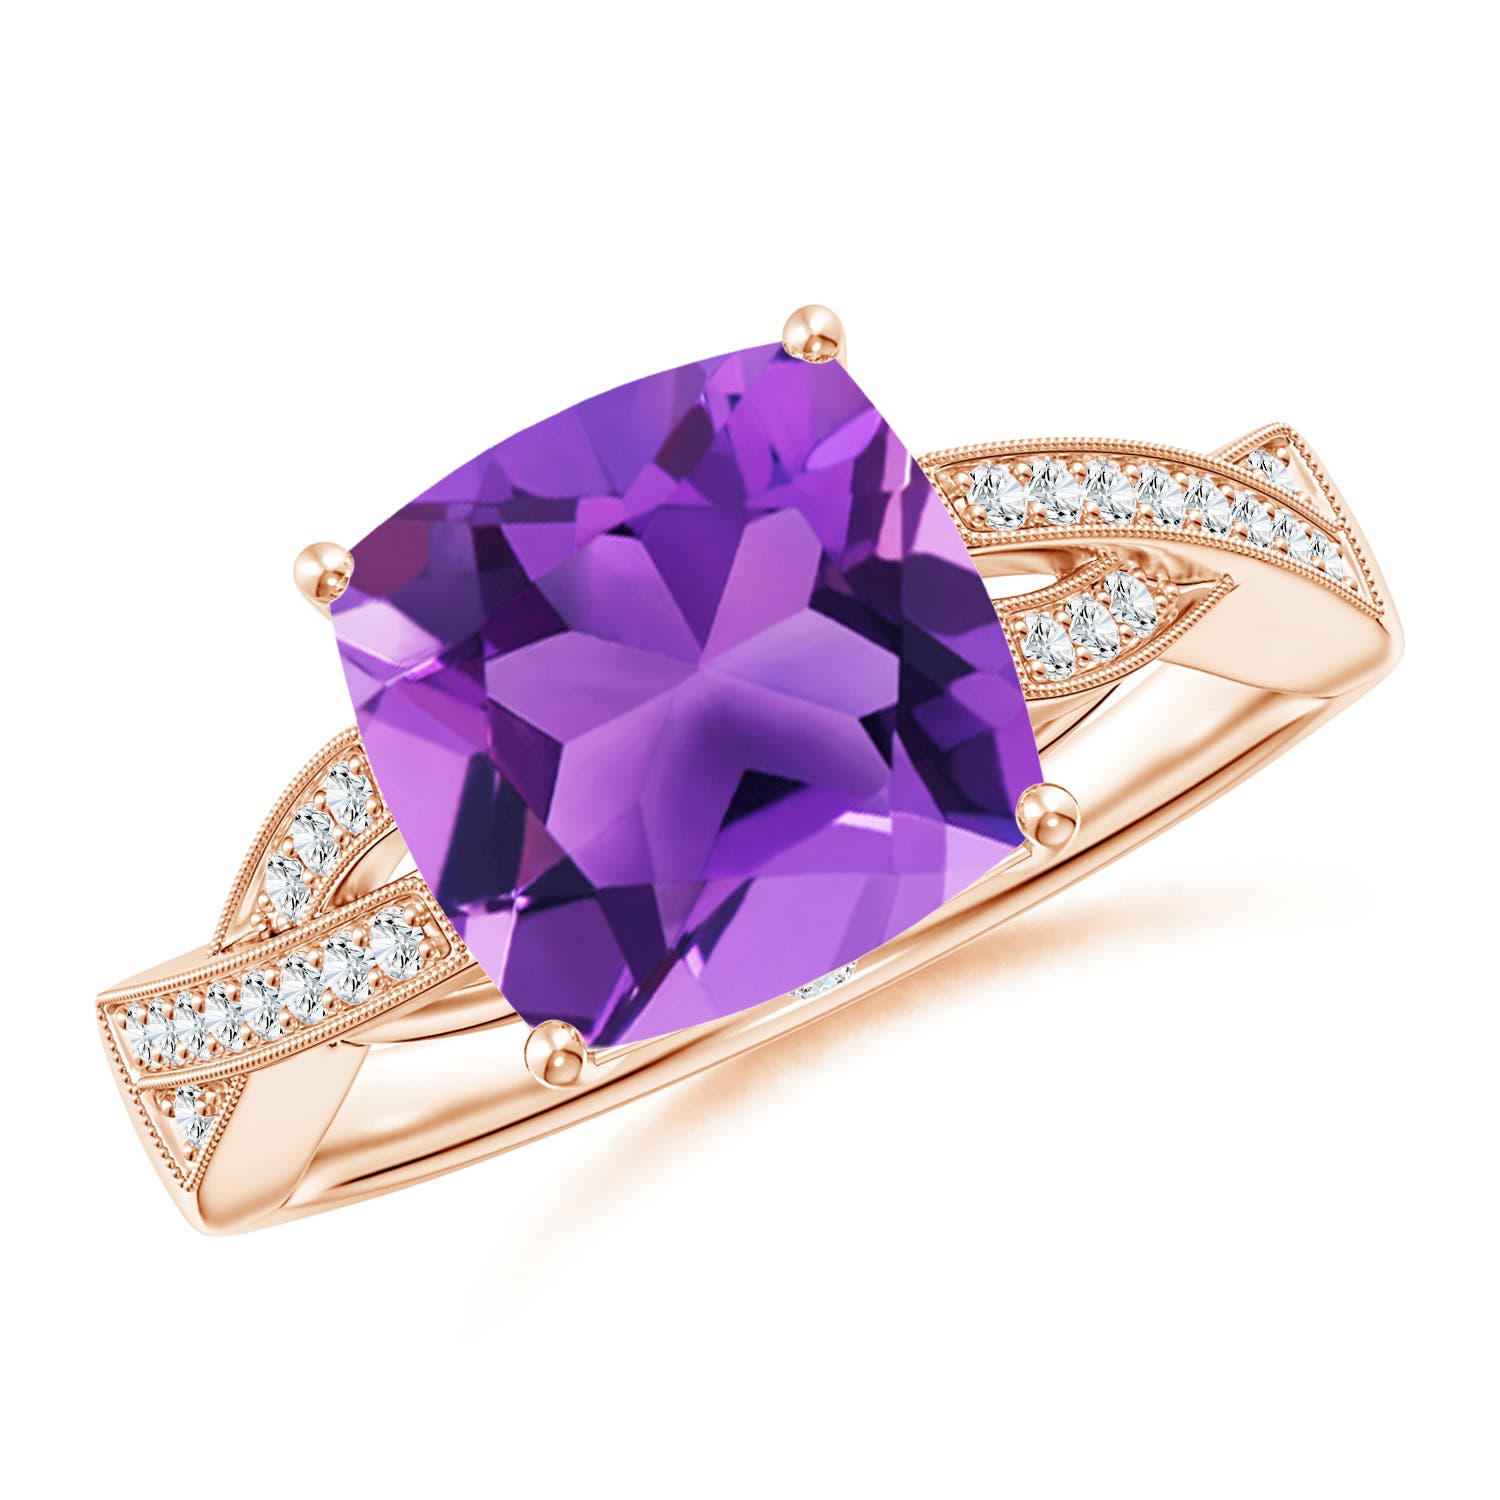 AAA - Amethyst / 3.24 CT / 14 KT Rose Gold